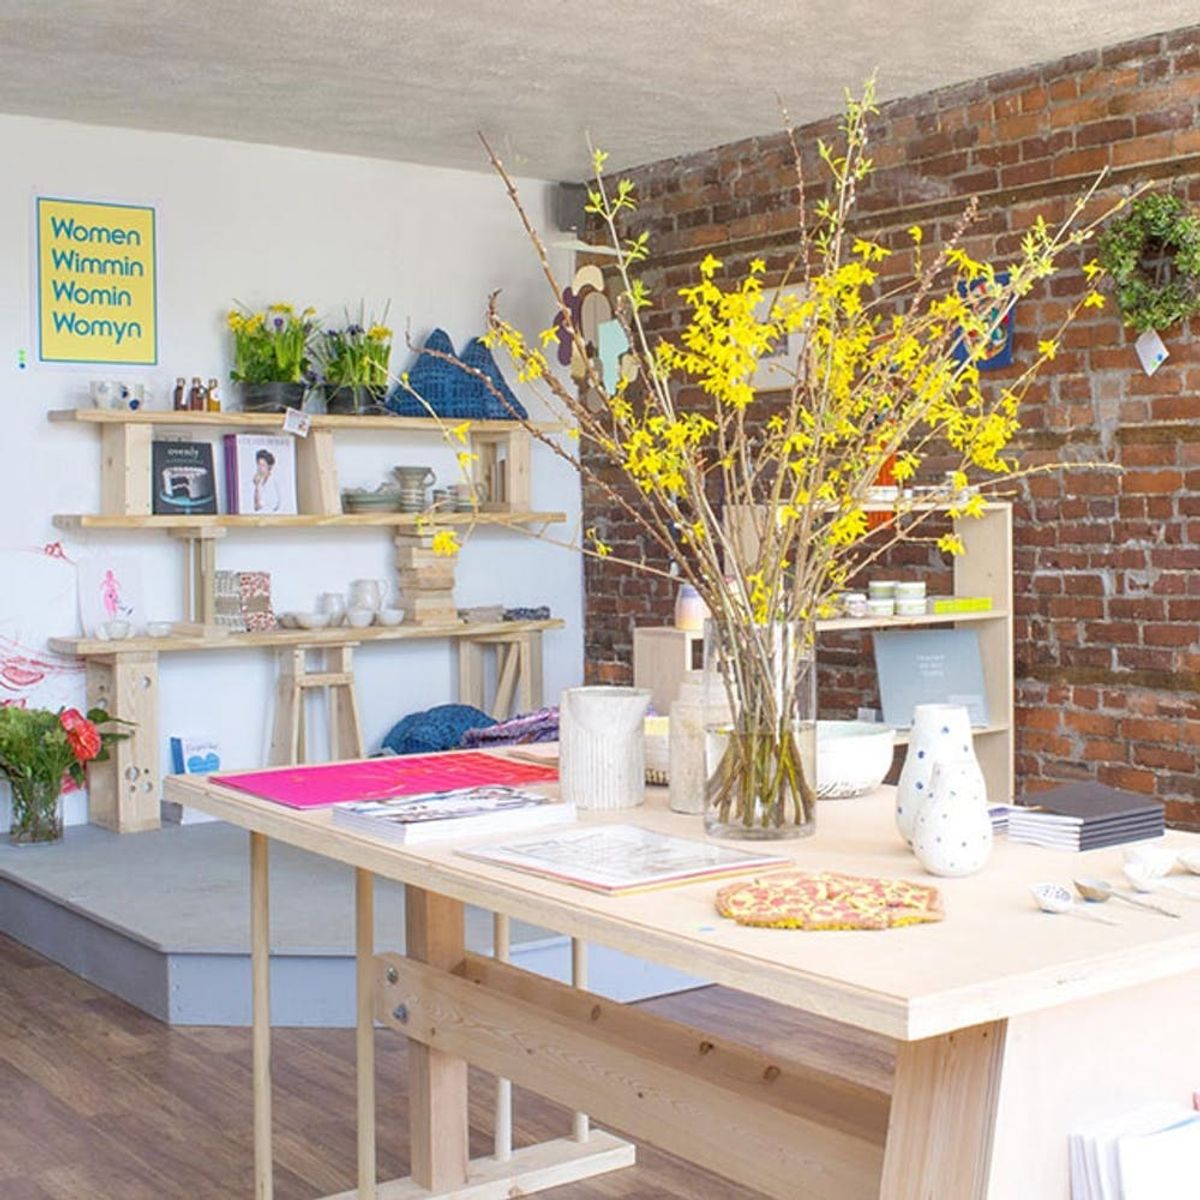 This Store Lets Women Pay Less Than Men to Combat the Wage Gap